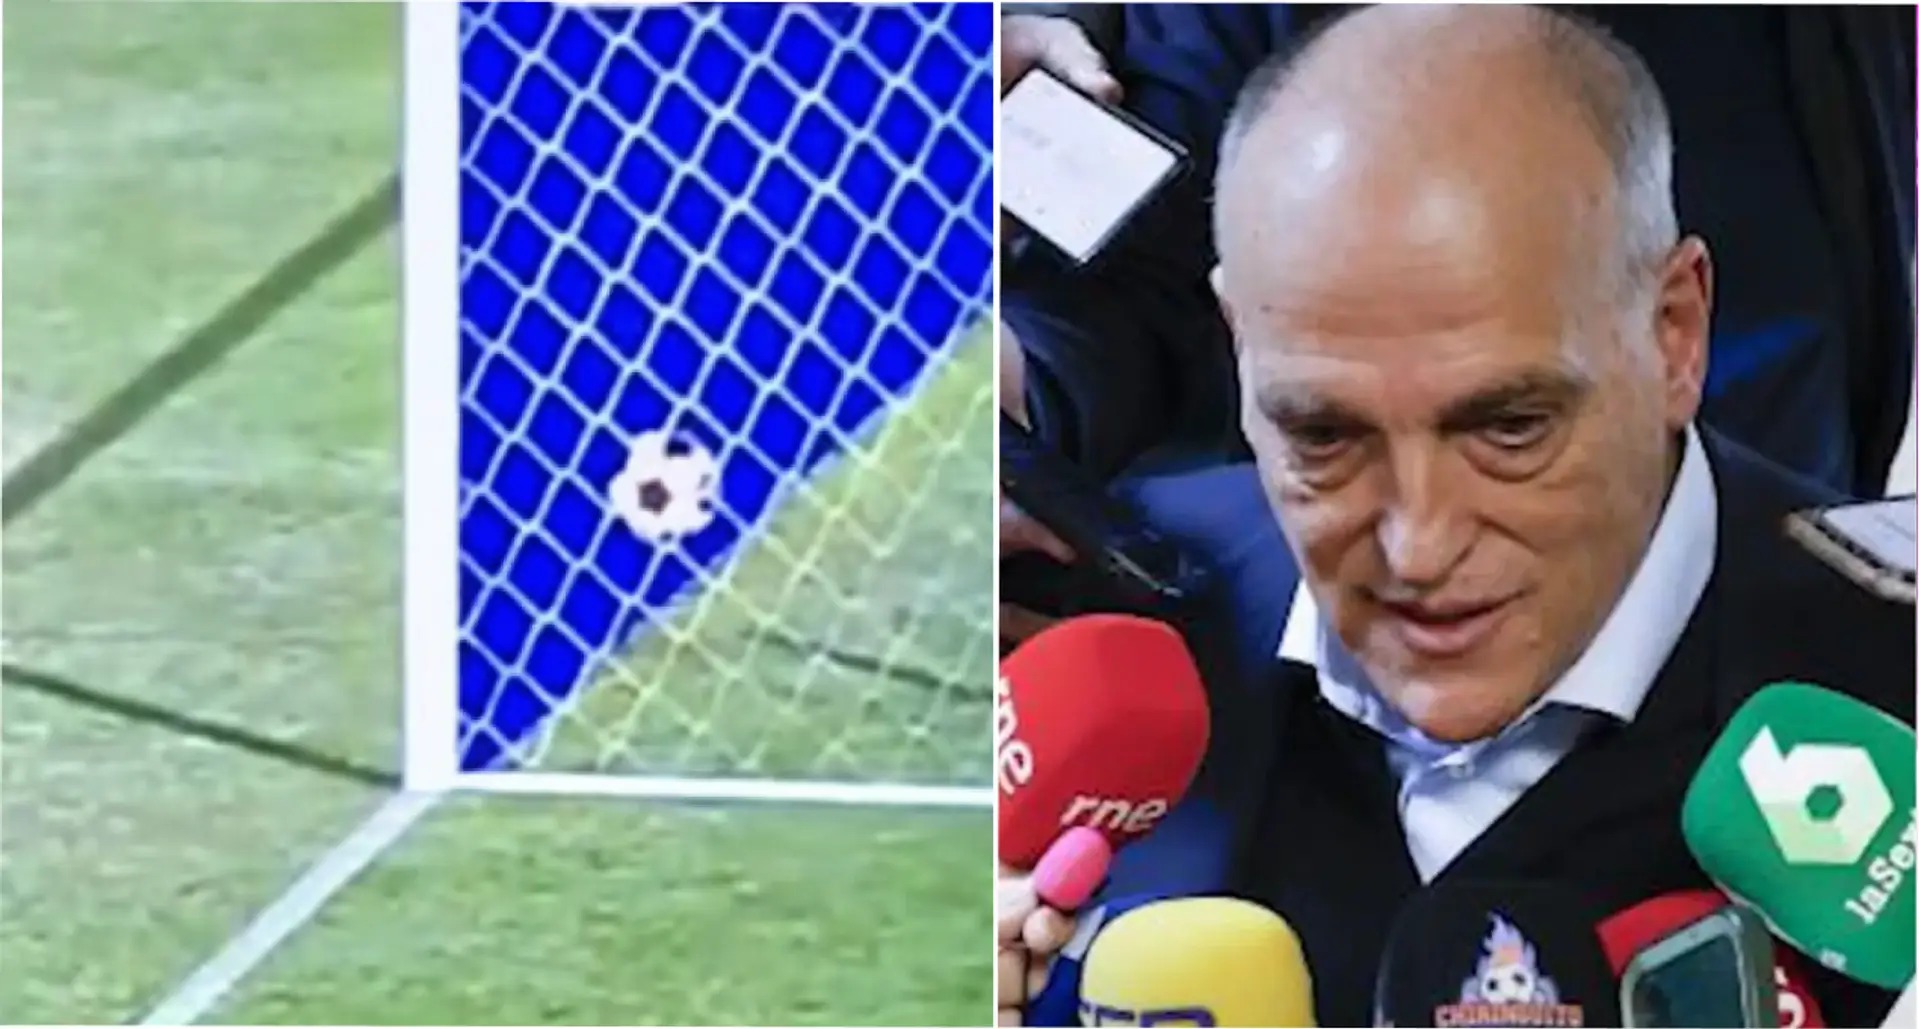 Tebas on goal-line technology: 'You cannot pay €5m for something that's not perfect.'